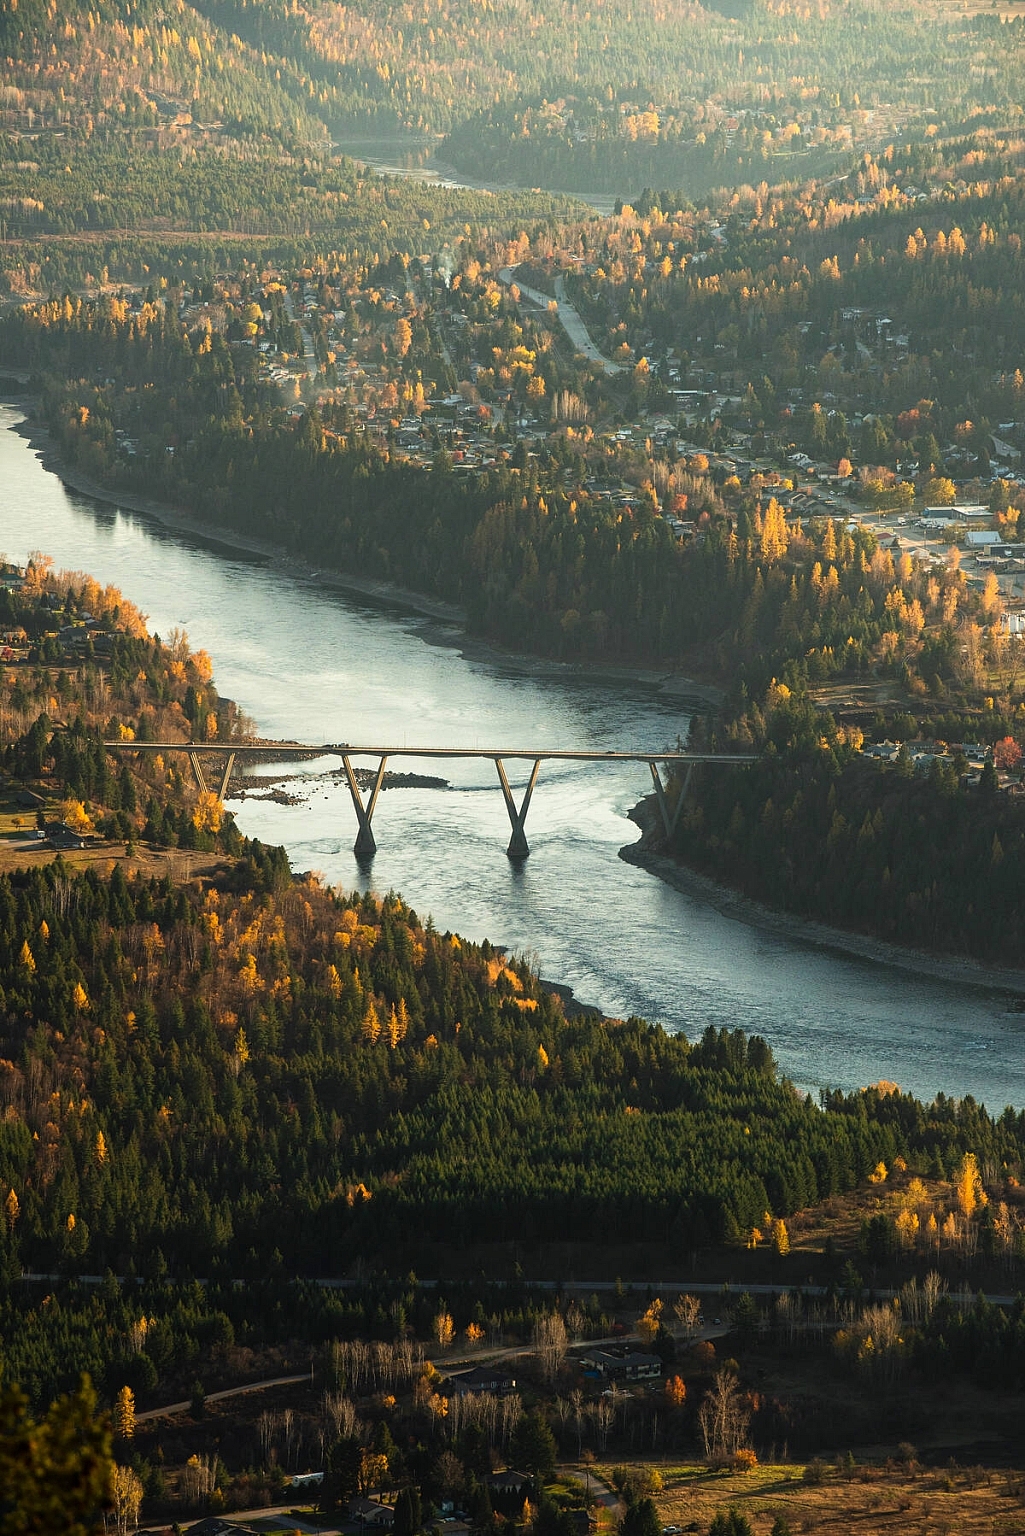 Overlooking a winding river crossed by a bridge, surrounded by thick forest and fall colours.